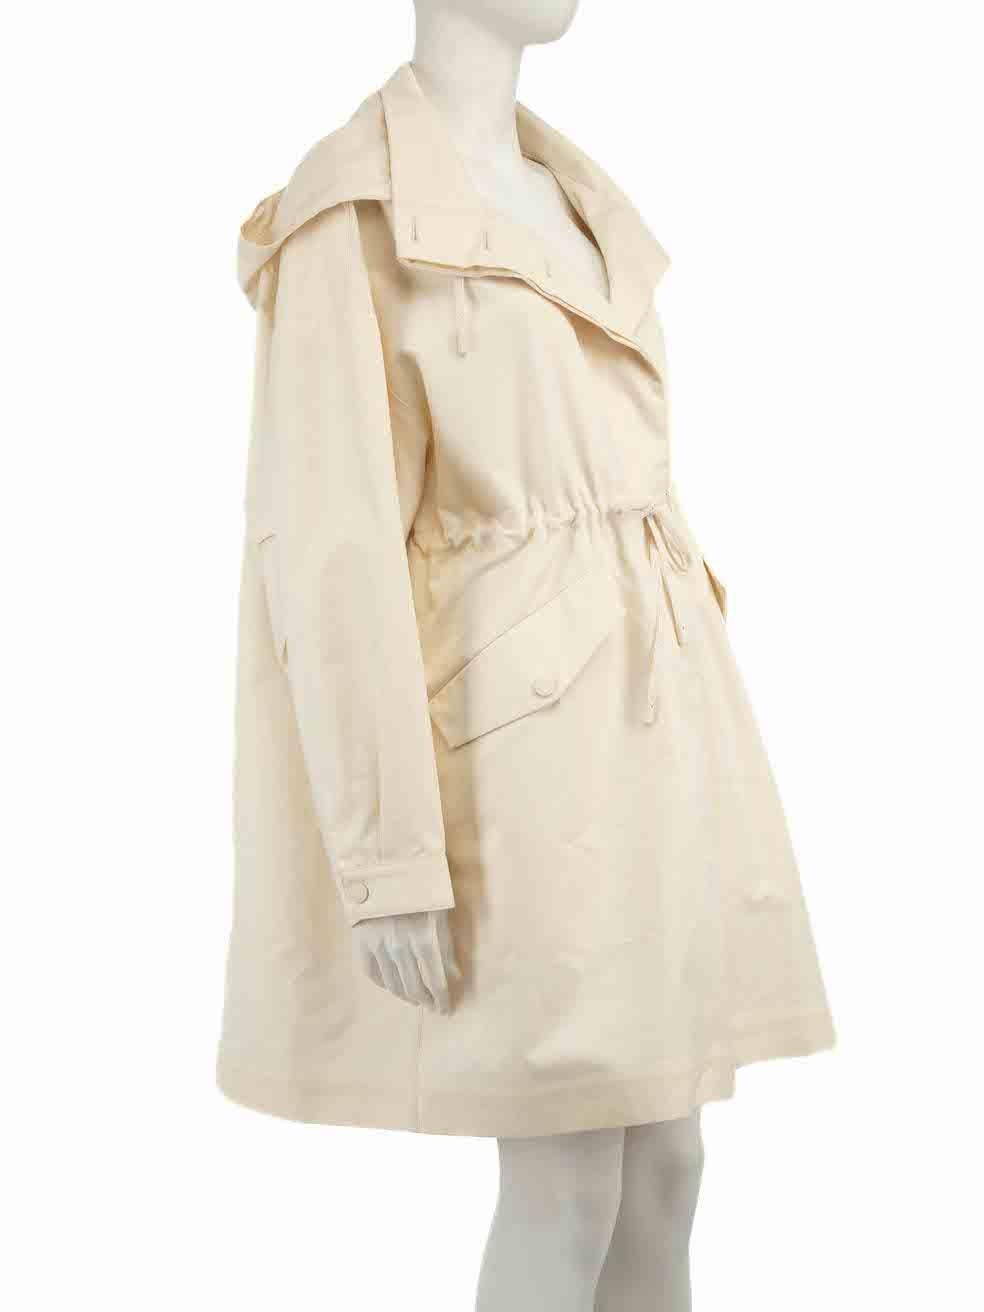 CONDITION is Never worn, with tags. No visible wear to coat is evident on this new Weekend Max Mara designer resale item.
 
Details
Ecru
Cotton
Parka coat
Detachable hood
Drawstring waist
Button up fastening
2x Side pockets
 
Composition
65% Cotton,